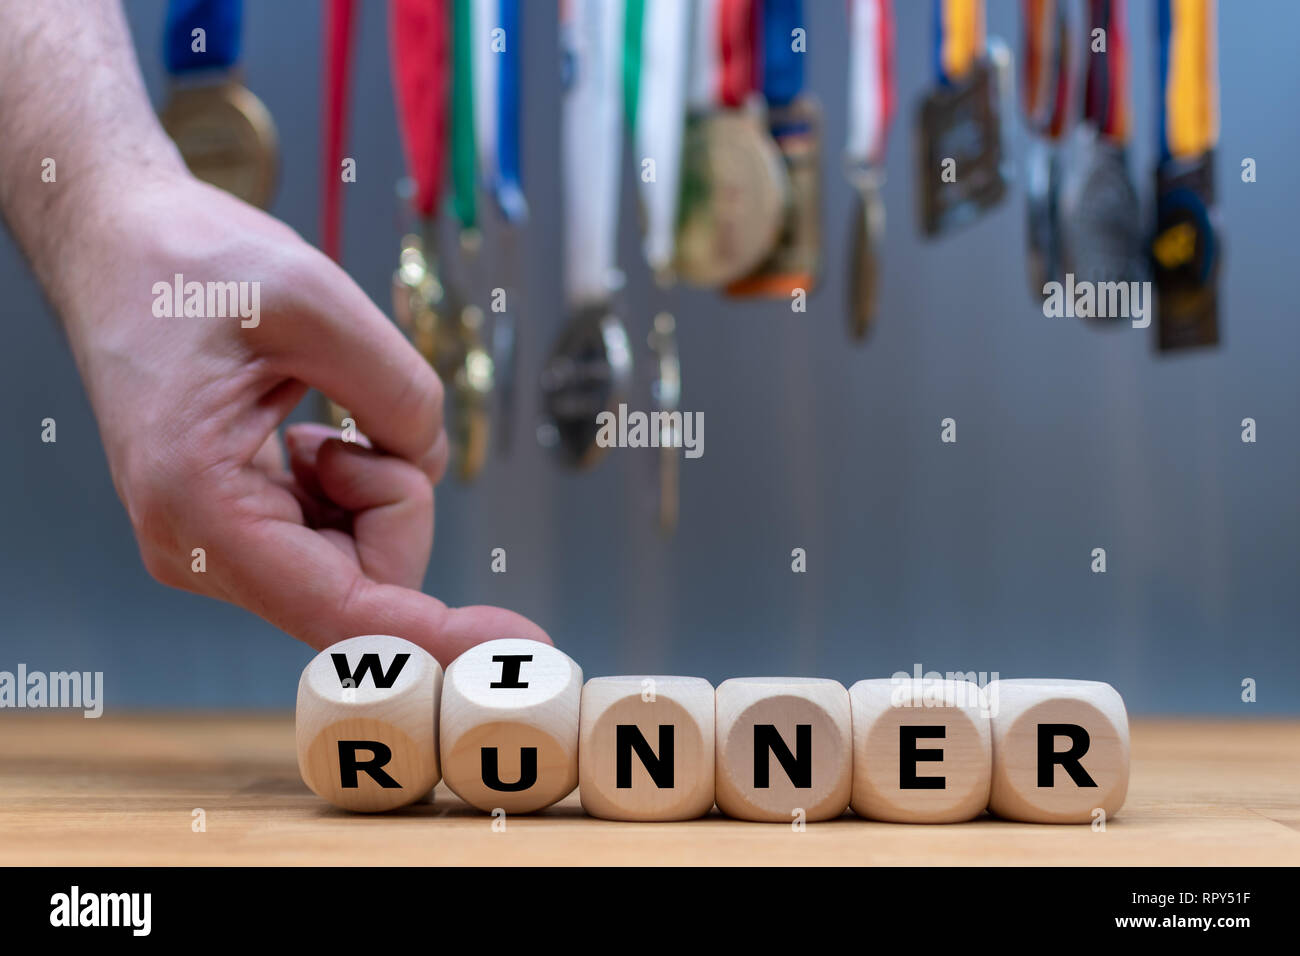 Hand turns a dice and changes the word 'RUNNER' to 'WINNER' in front of a background full of medals. Stock Photo